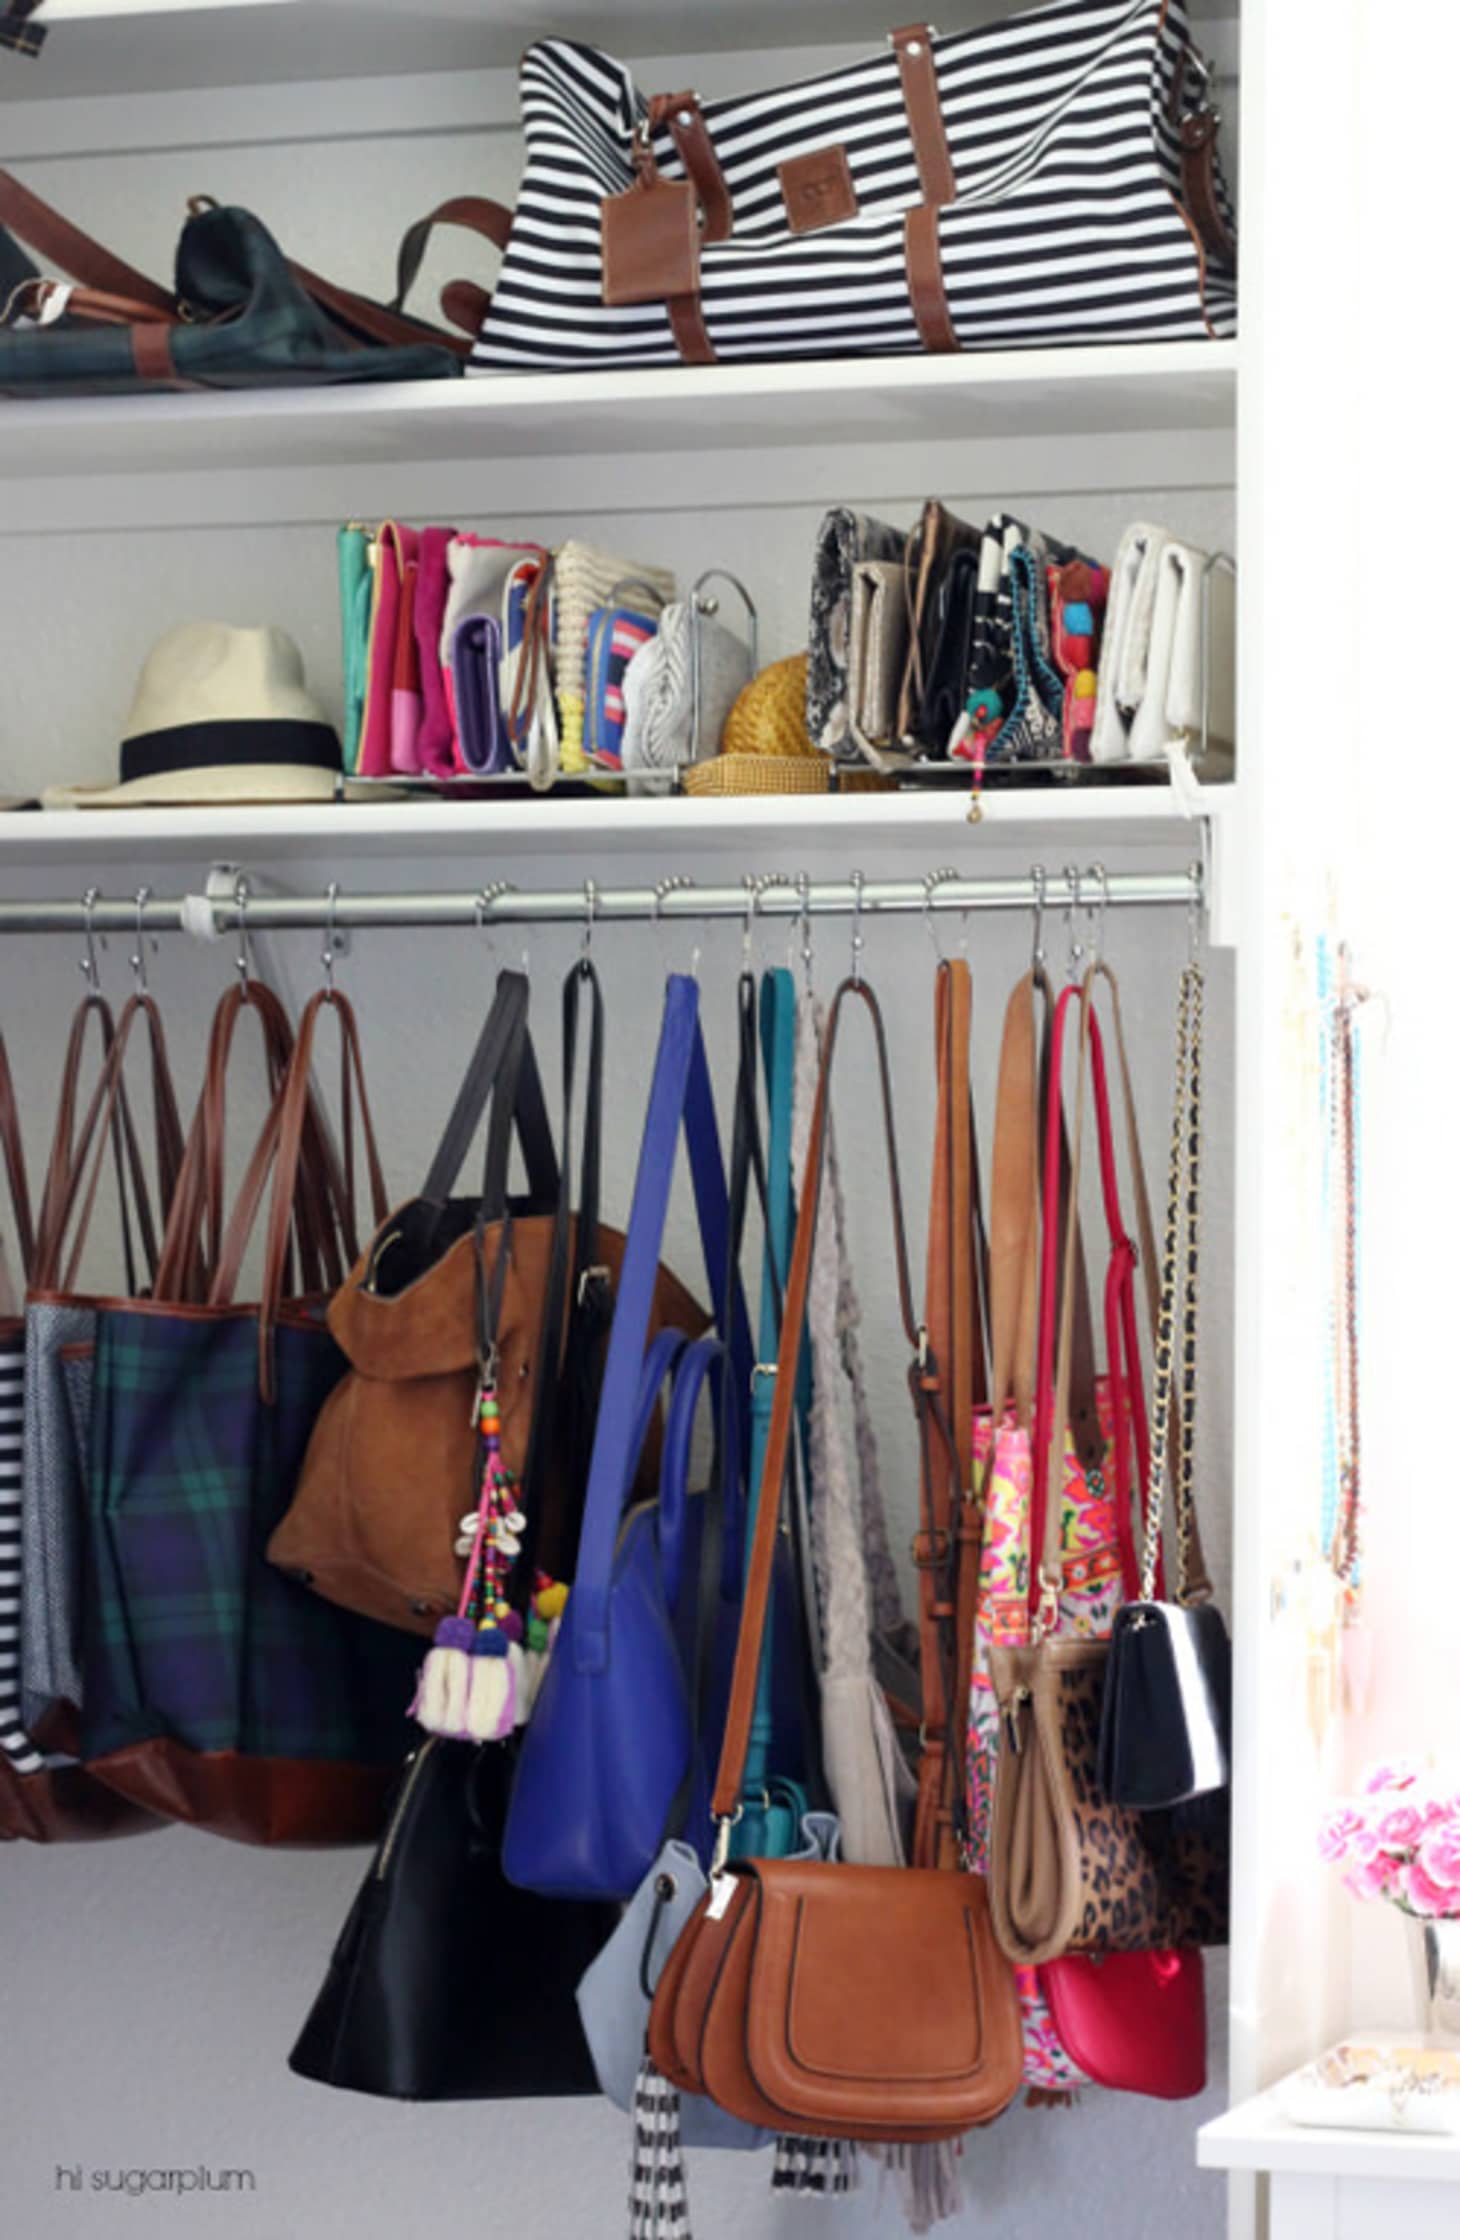 Purse Storage Options to Buy or DIY | Apartment Therapy